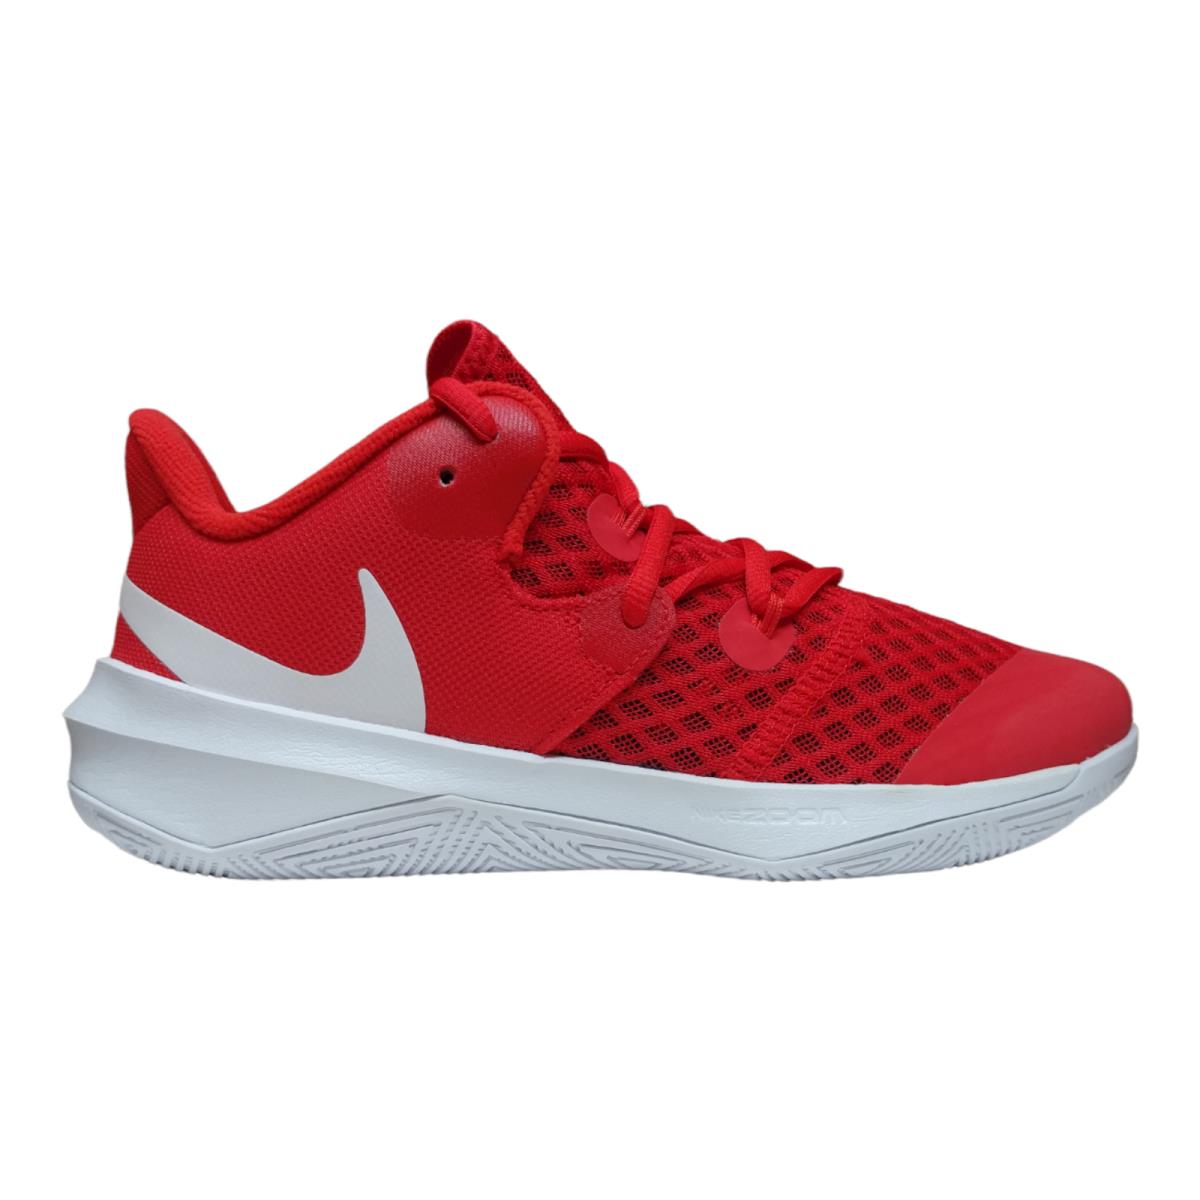 Nike Women`s Hyperspeed Court Athletic Shoe - US Size 8 Red CI2963-610